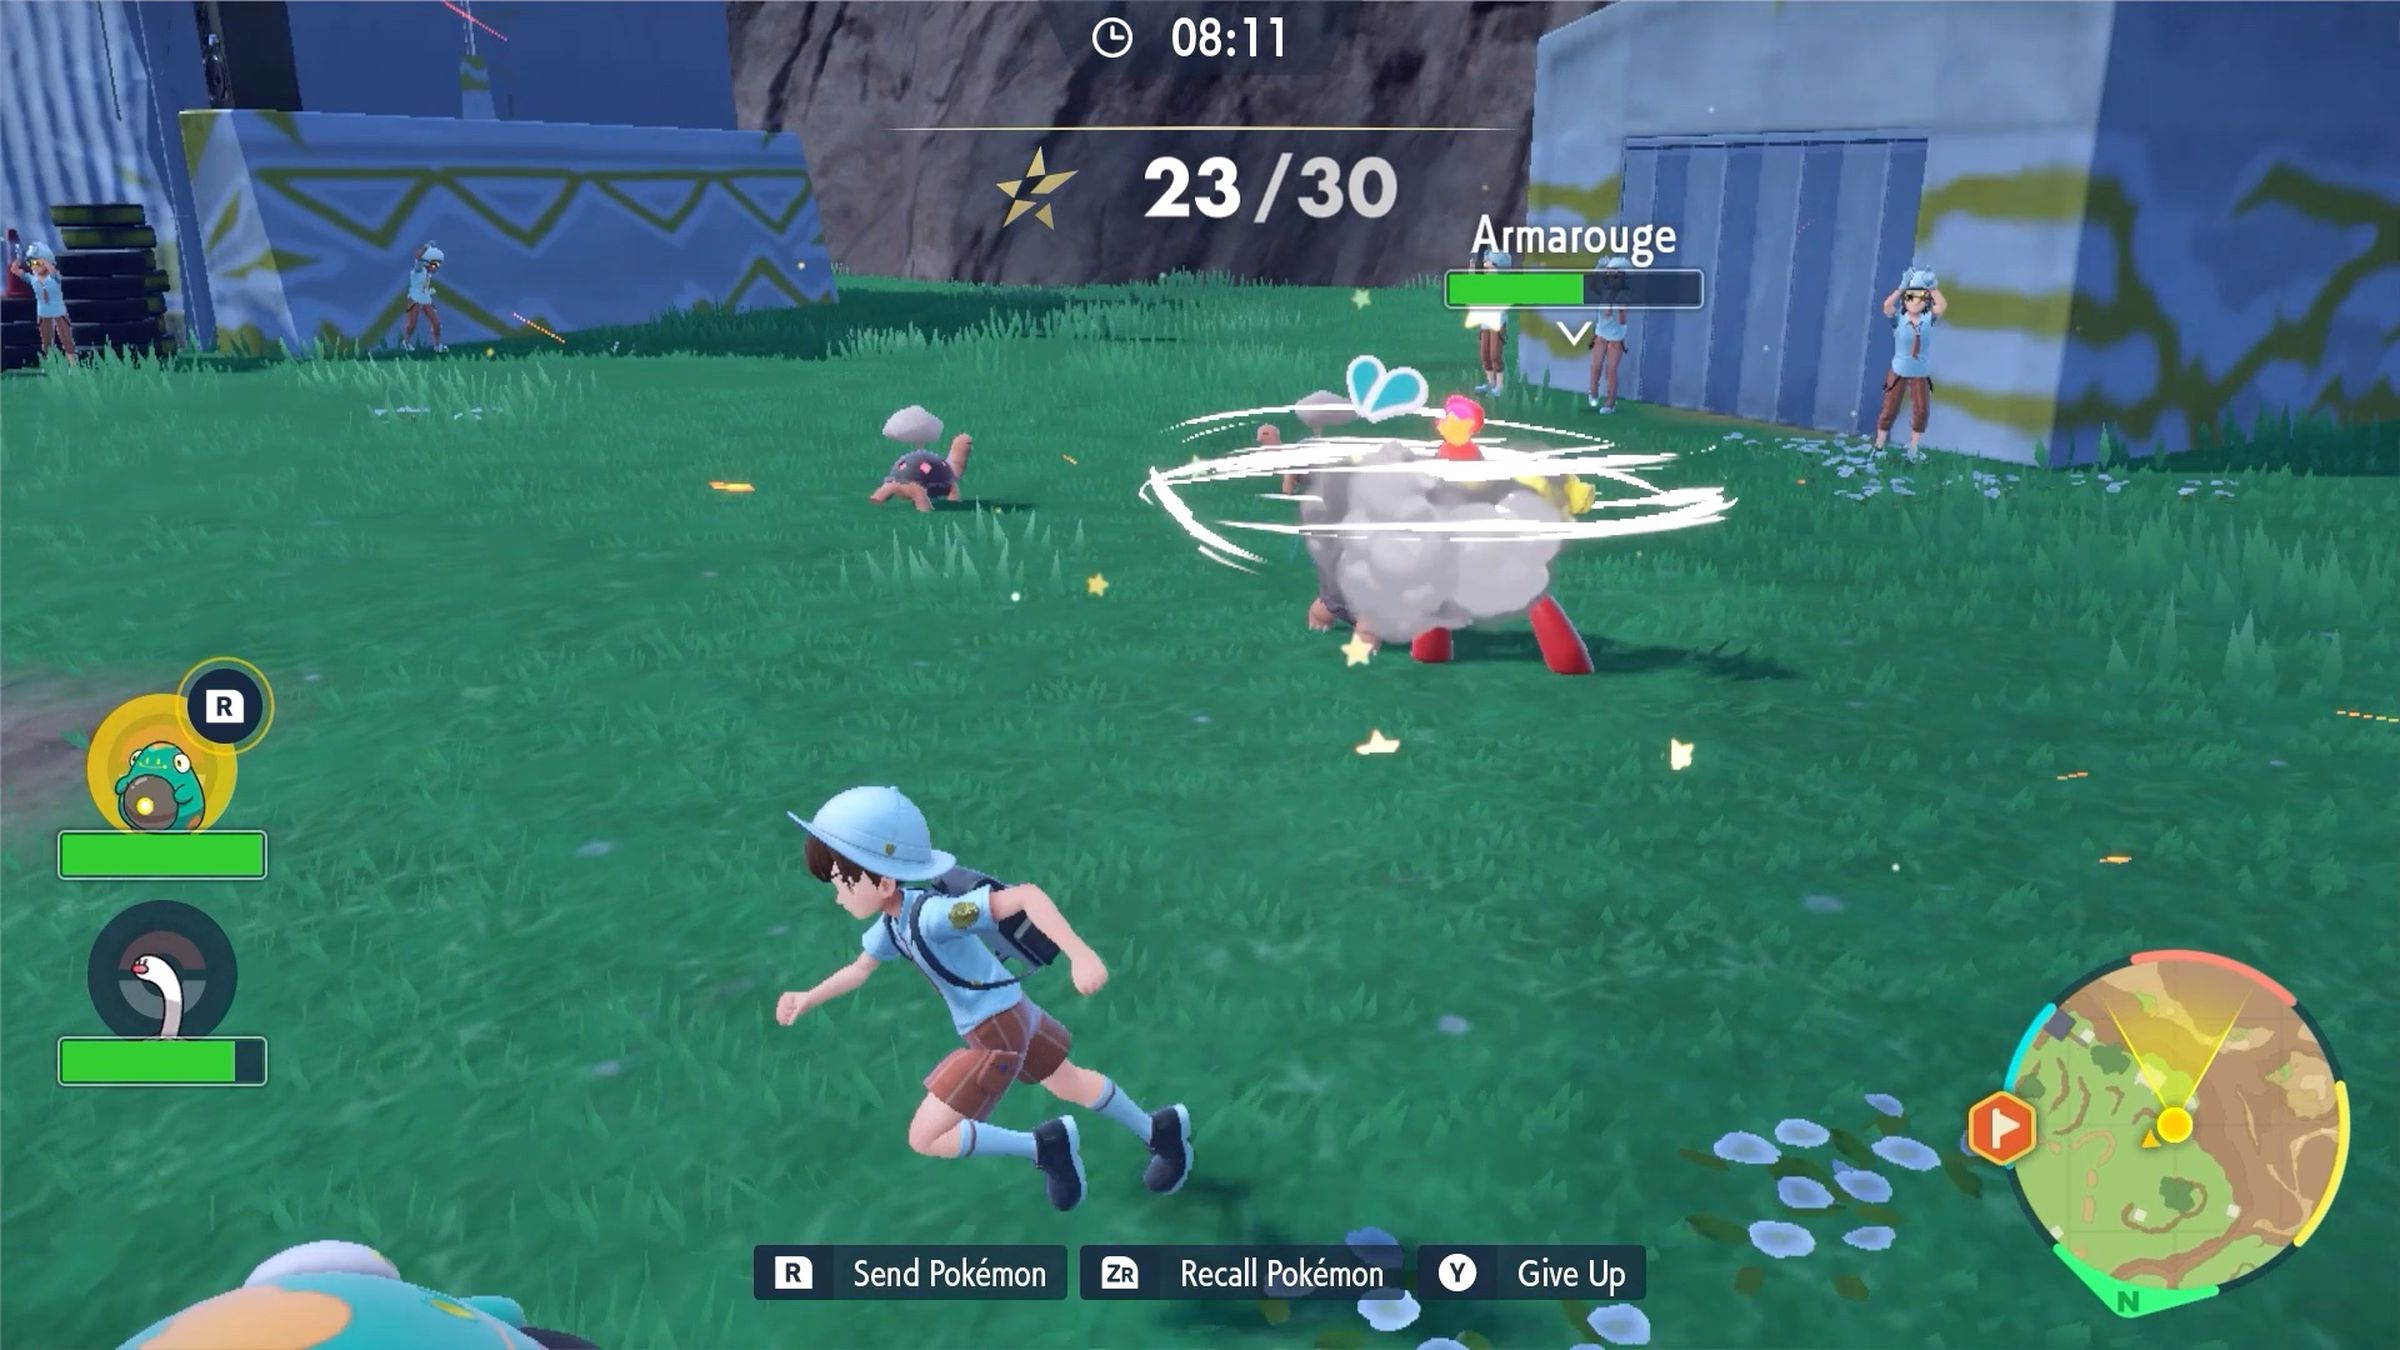 A pokémon trainer running across a field where there are tents set up. In the background, three smoke-breathing tortoises are fighting with a humanoid lighter.